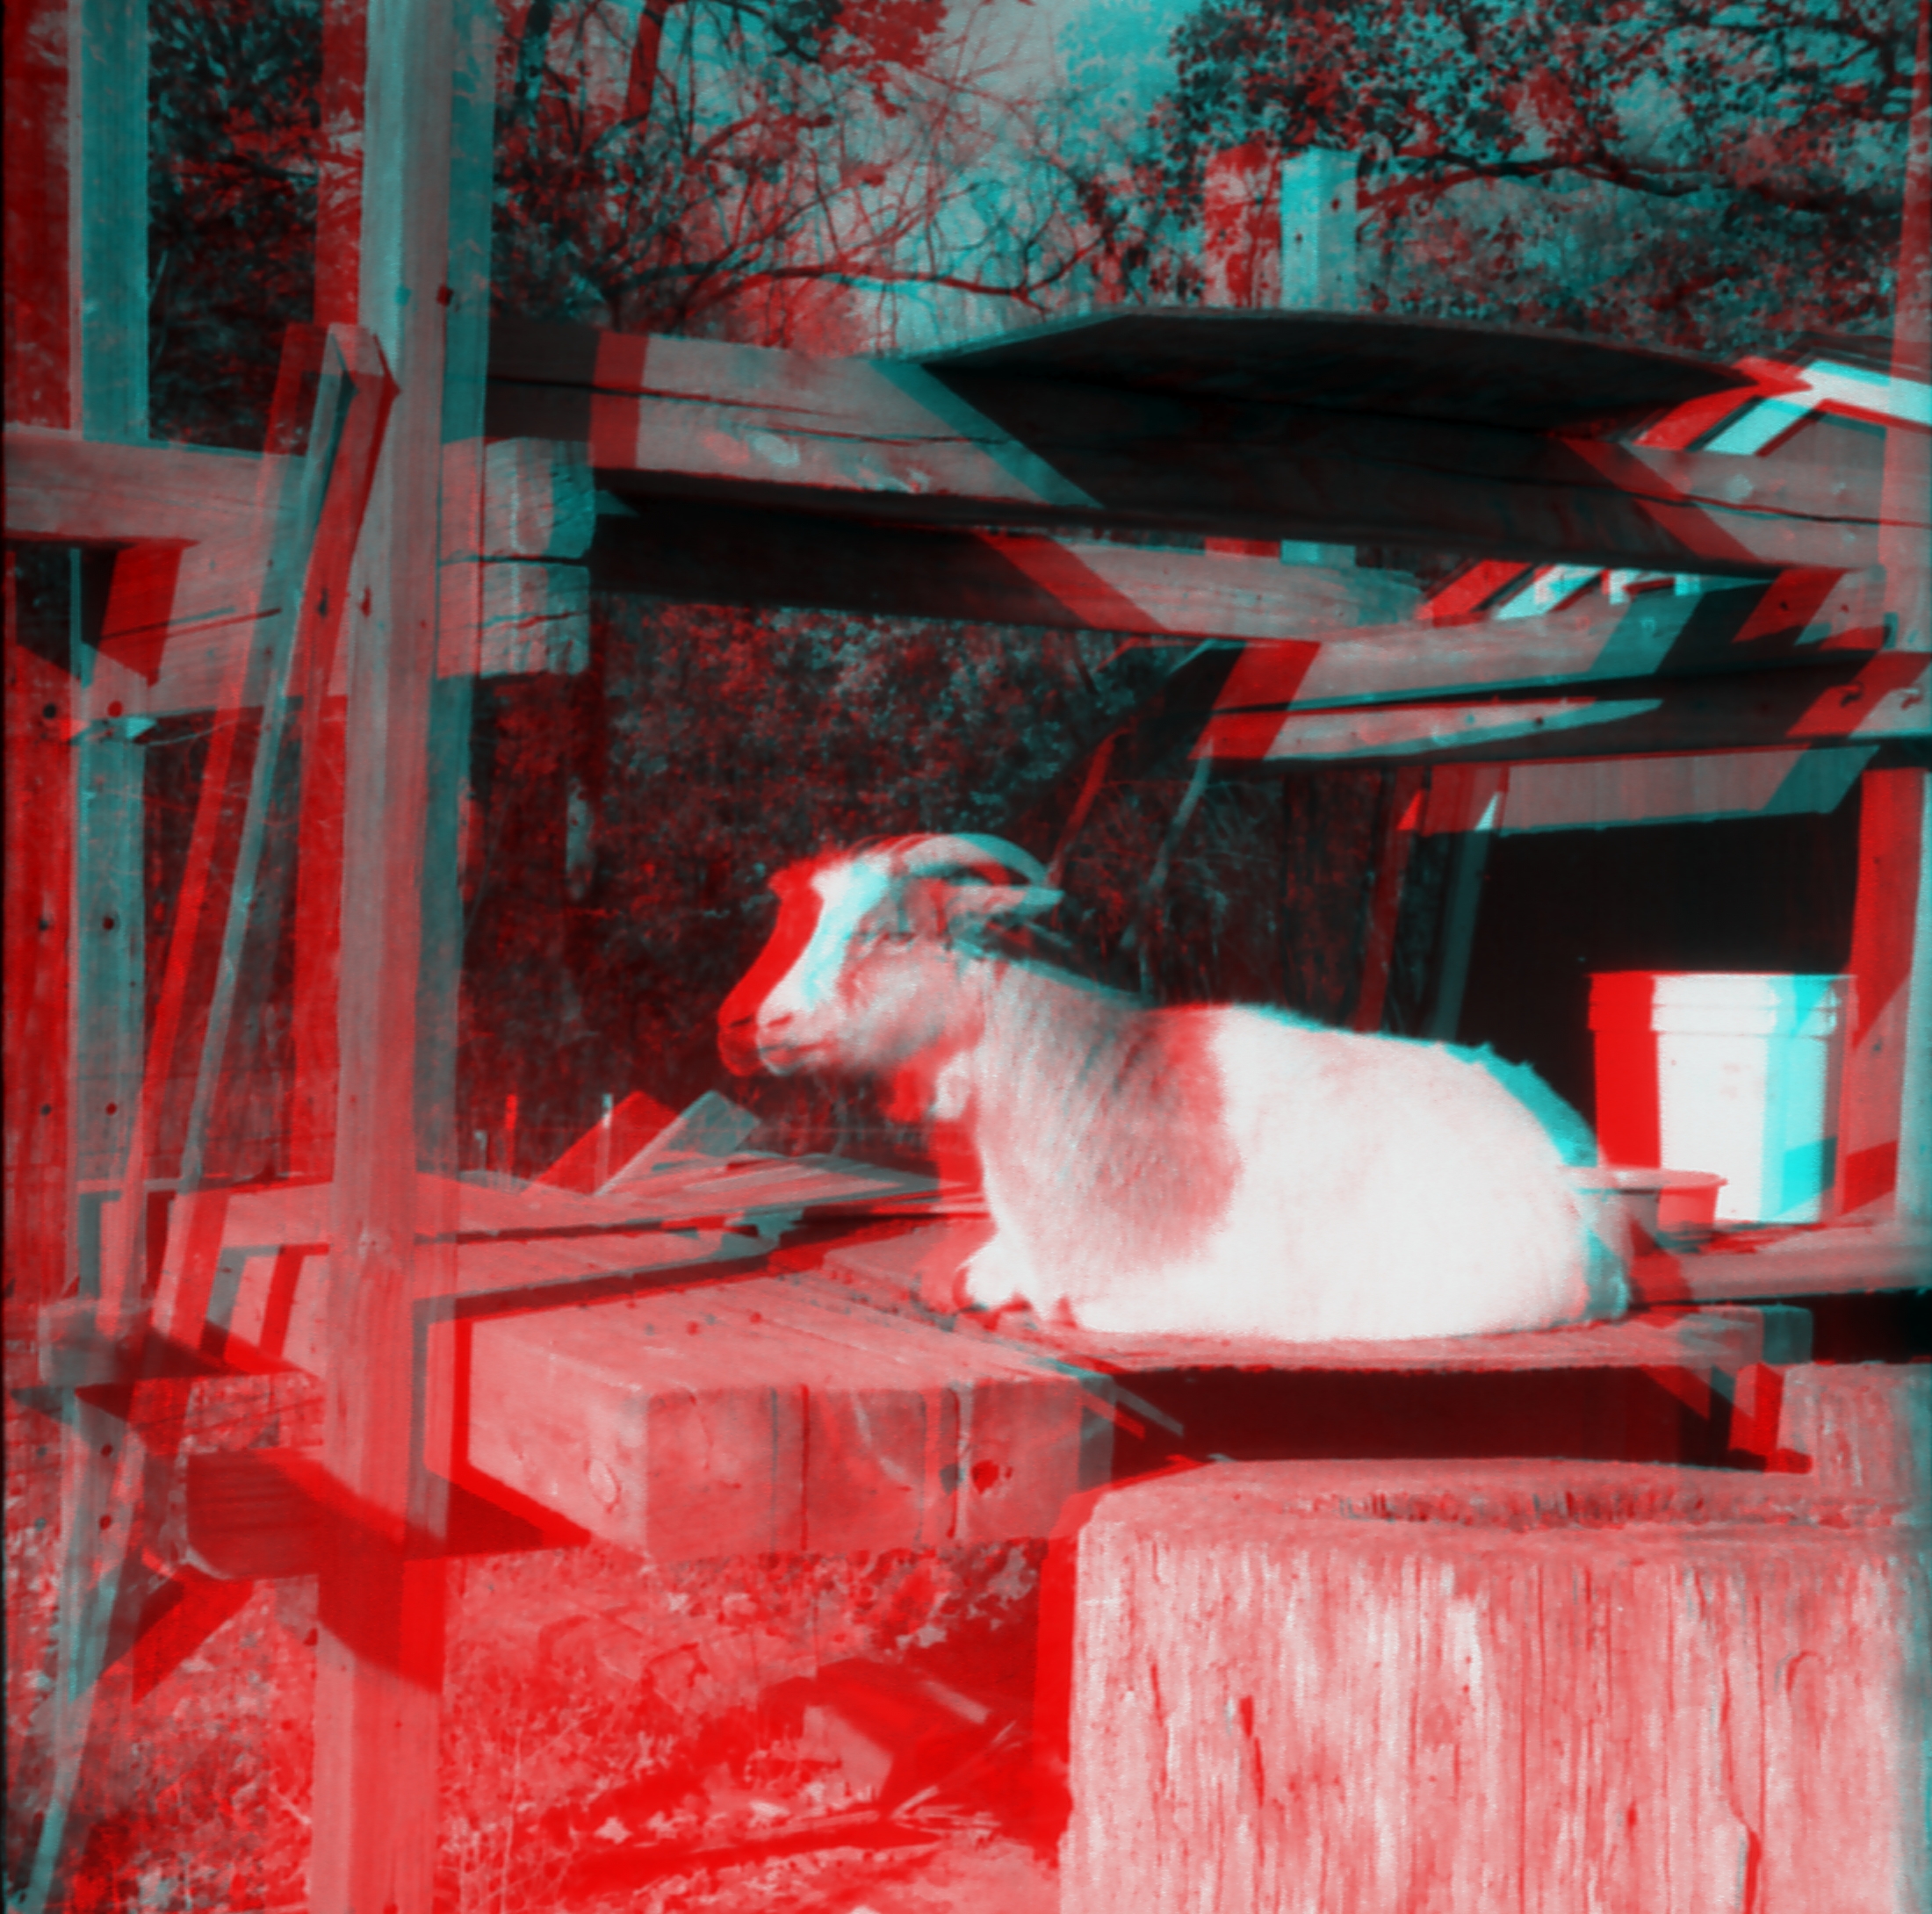 Cider Mill Goat (4) (anaglyph) (519466501)